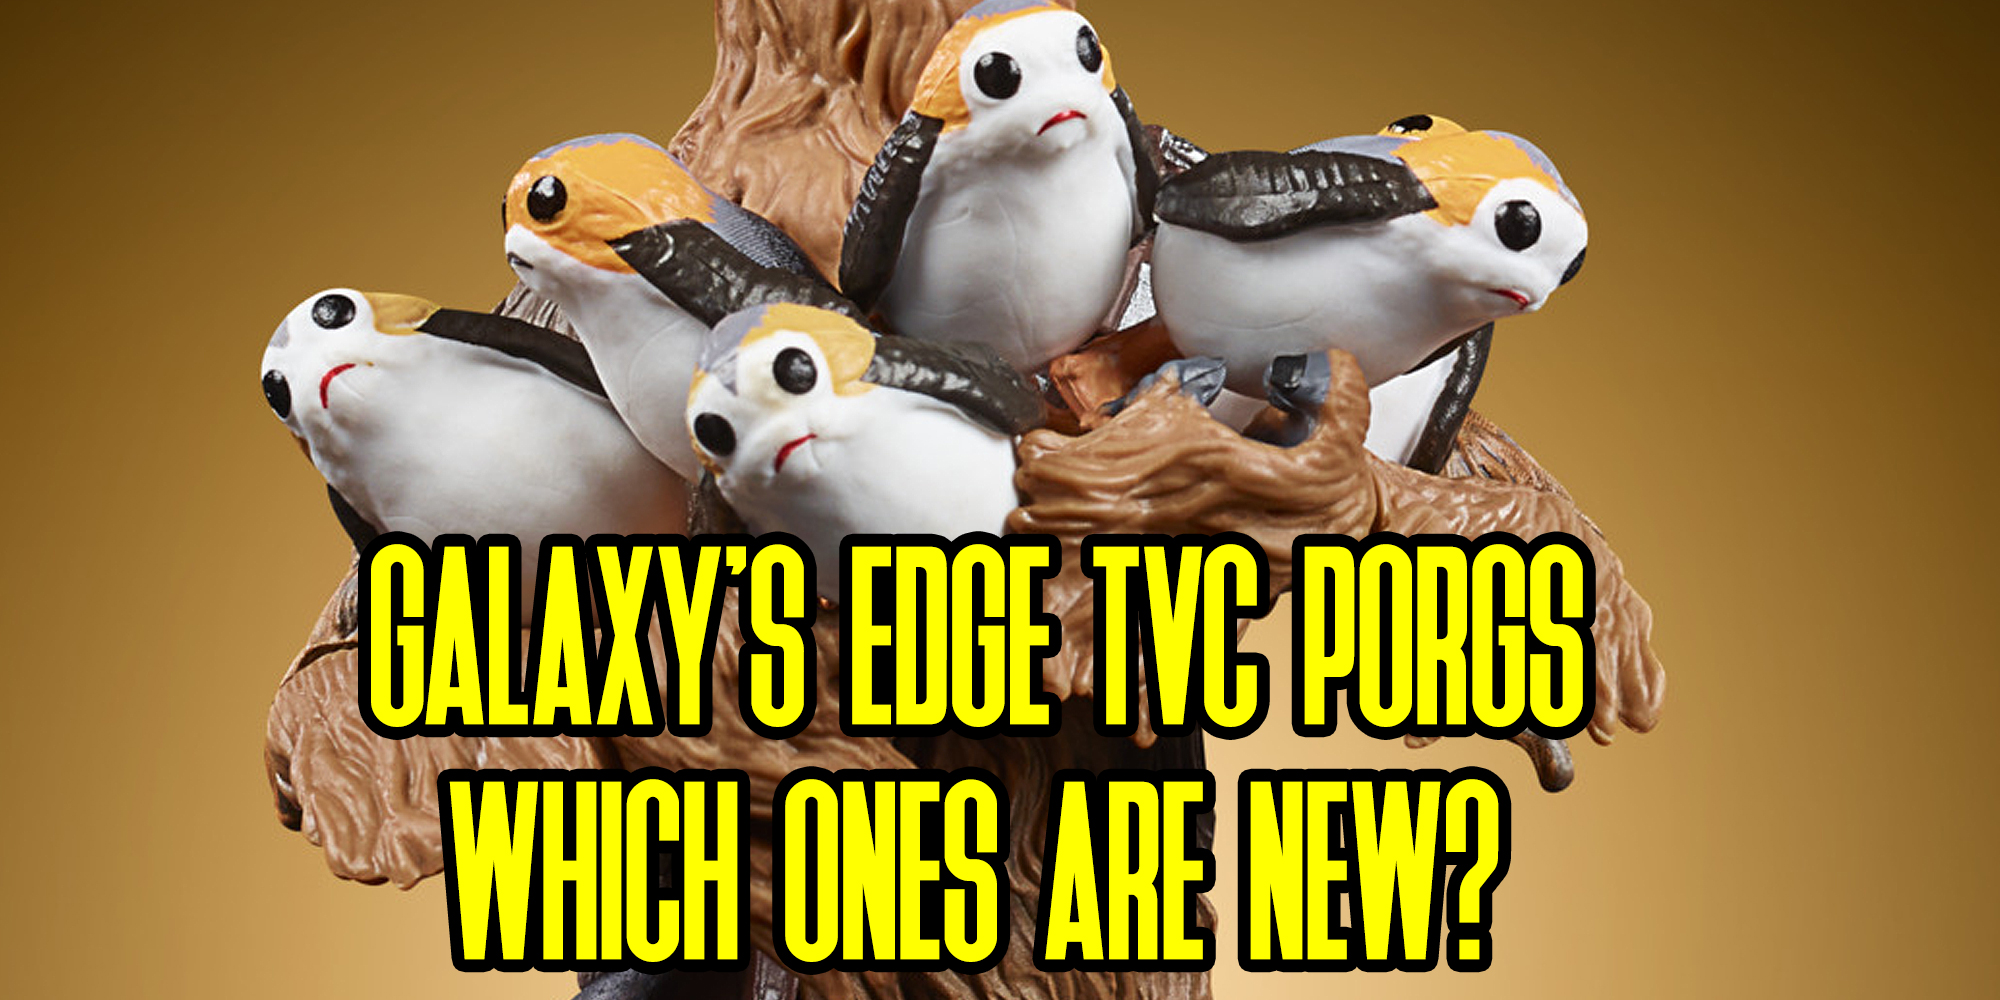 Galaxy's Edge TVC Porgs - Which Ones Are New?